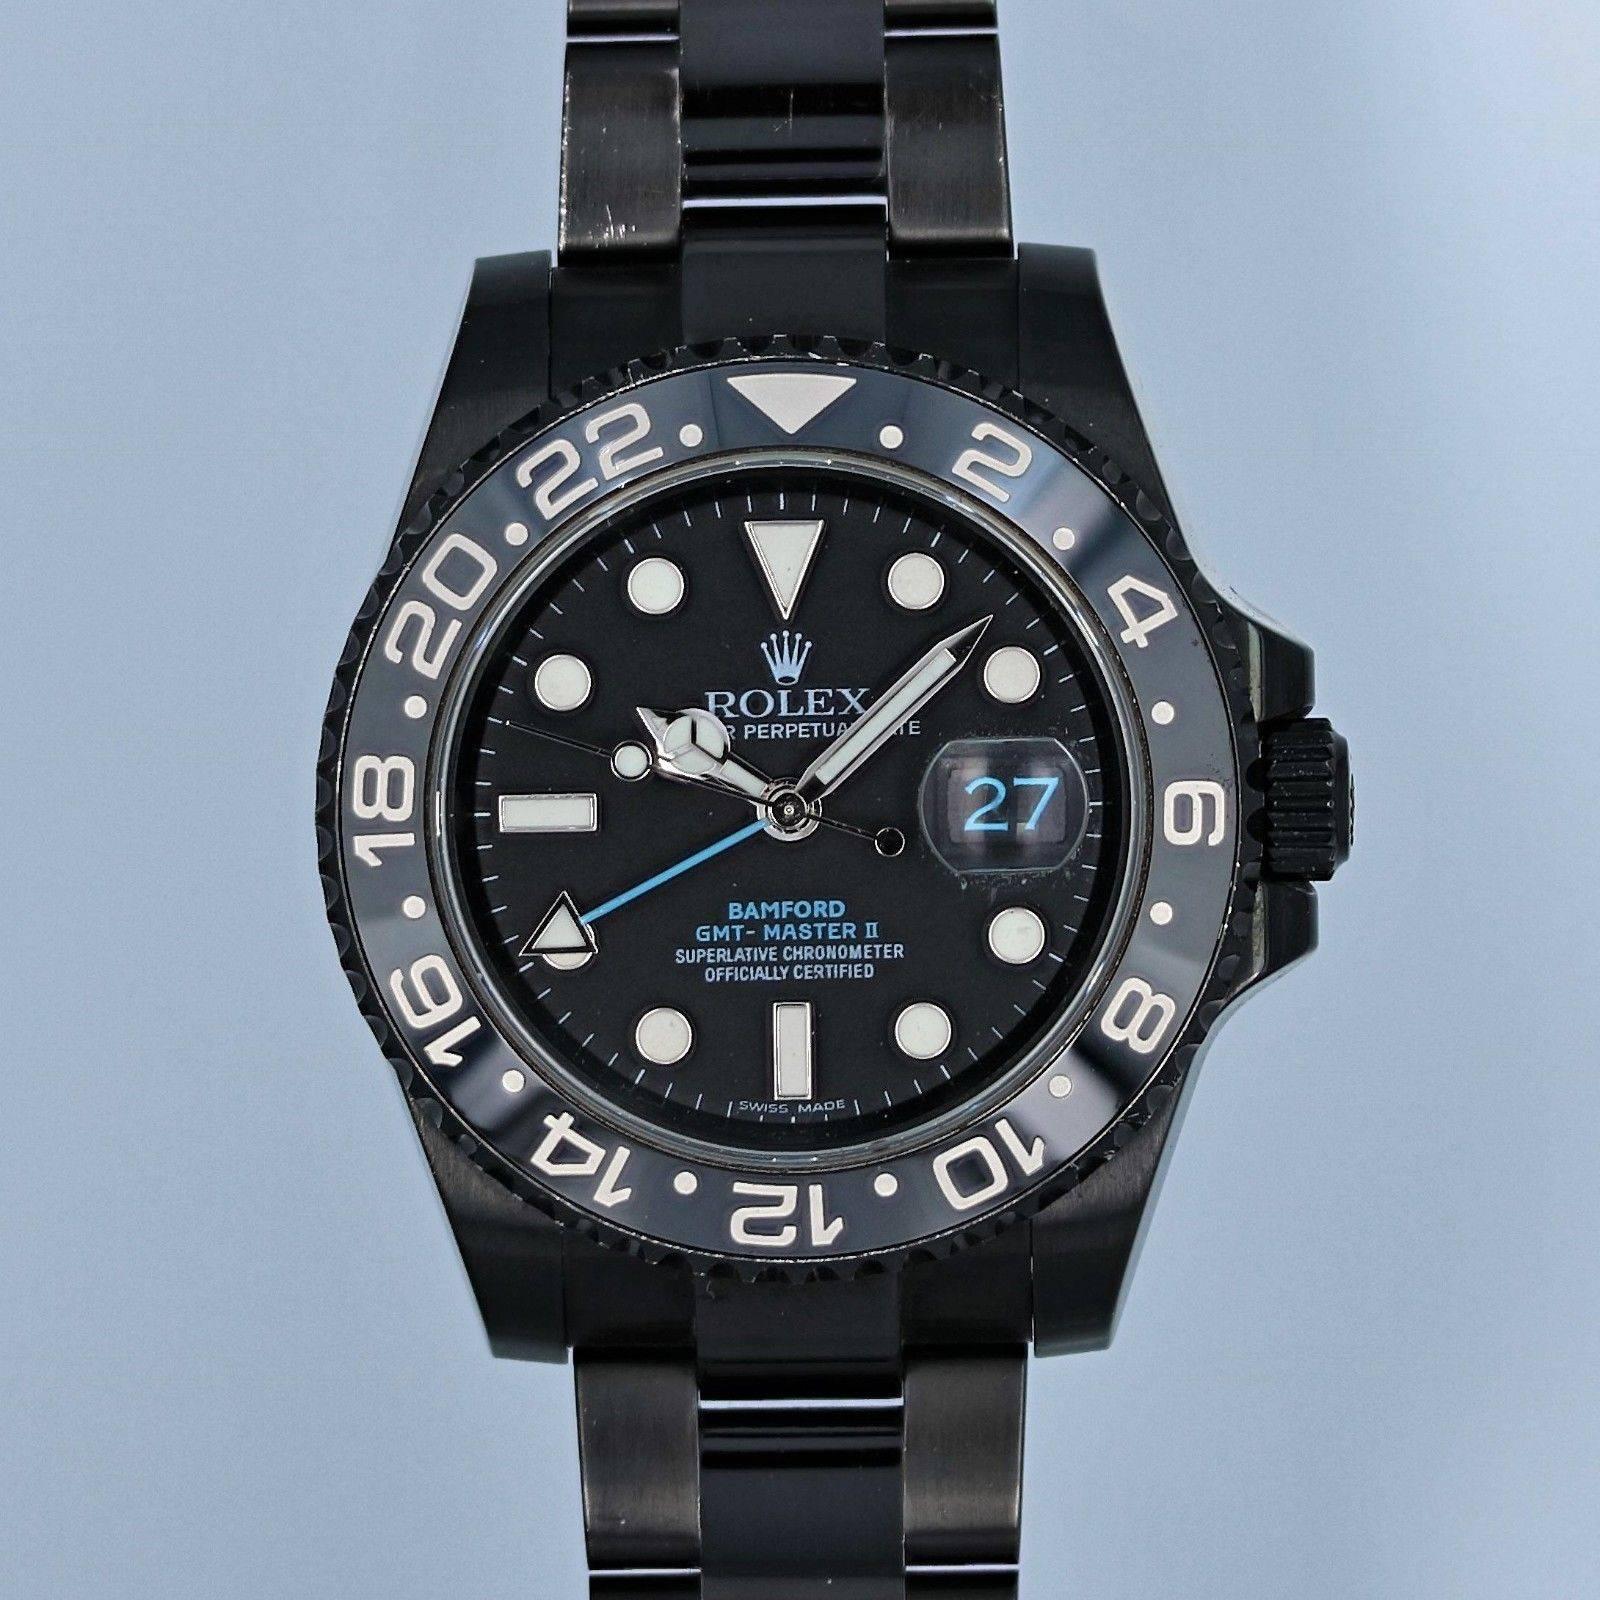 Brand Name  Rolex 
Style Number  116710 
Series  Bamford GMT Master II 
Gender  Men's 
Case Material  DLC/PVD Coated Stainless Steel 
Dial Color  Black w/ Blue Accents 
Movement  Automatic 
Engine  Cal. 3185 
Functions  Hours, Minutes, Seconds,